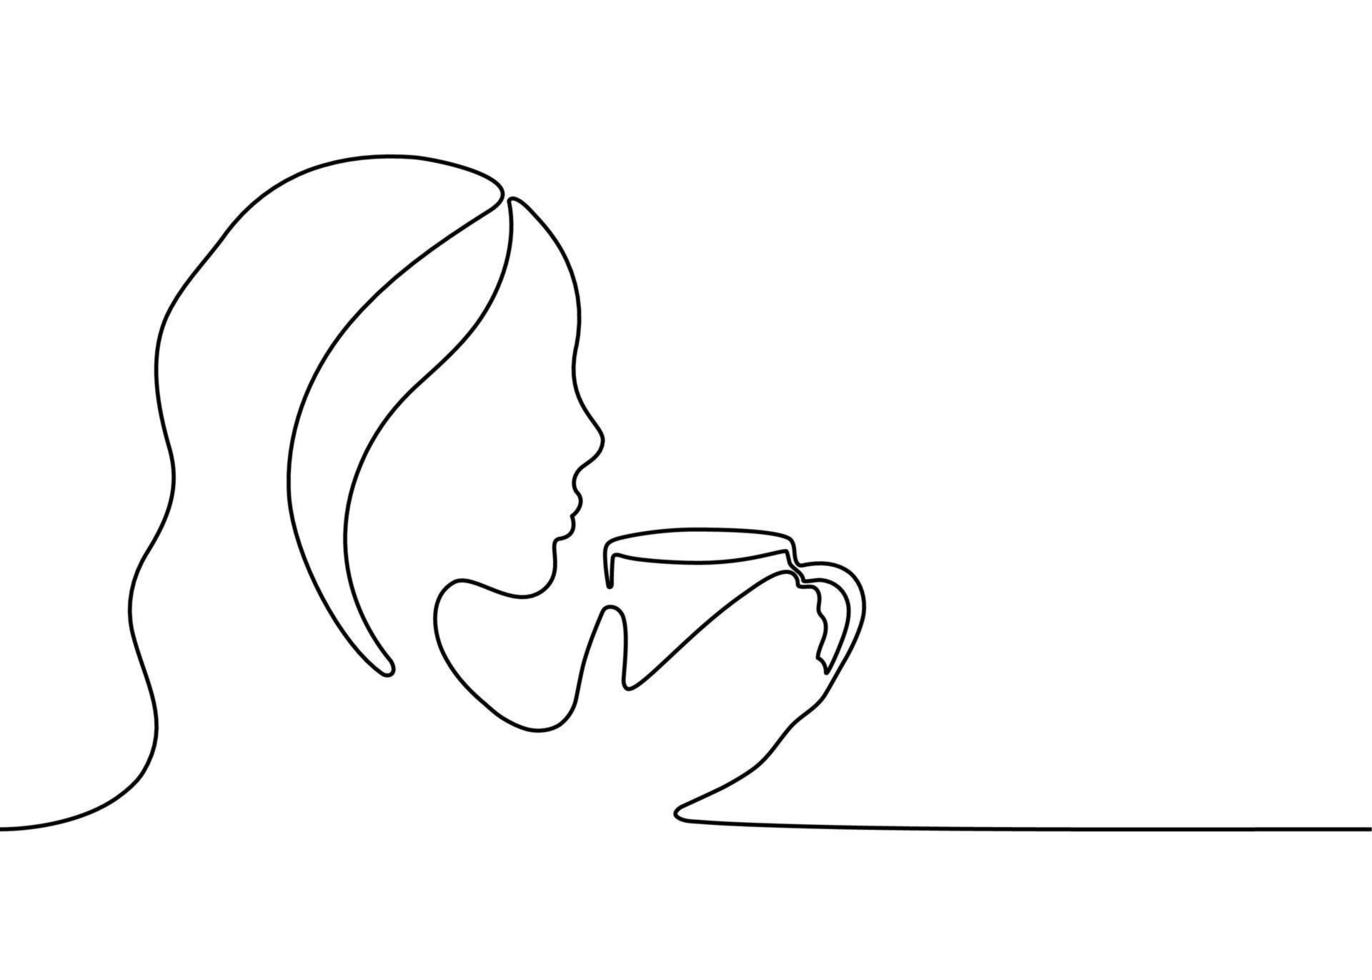 Woman with cup of coffee or tea, one single continuous line drawing. Simple abstract outline of girl and mug with steam beverage. Vector illustration